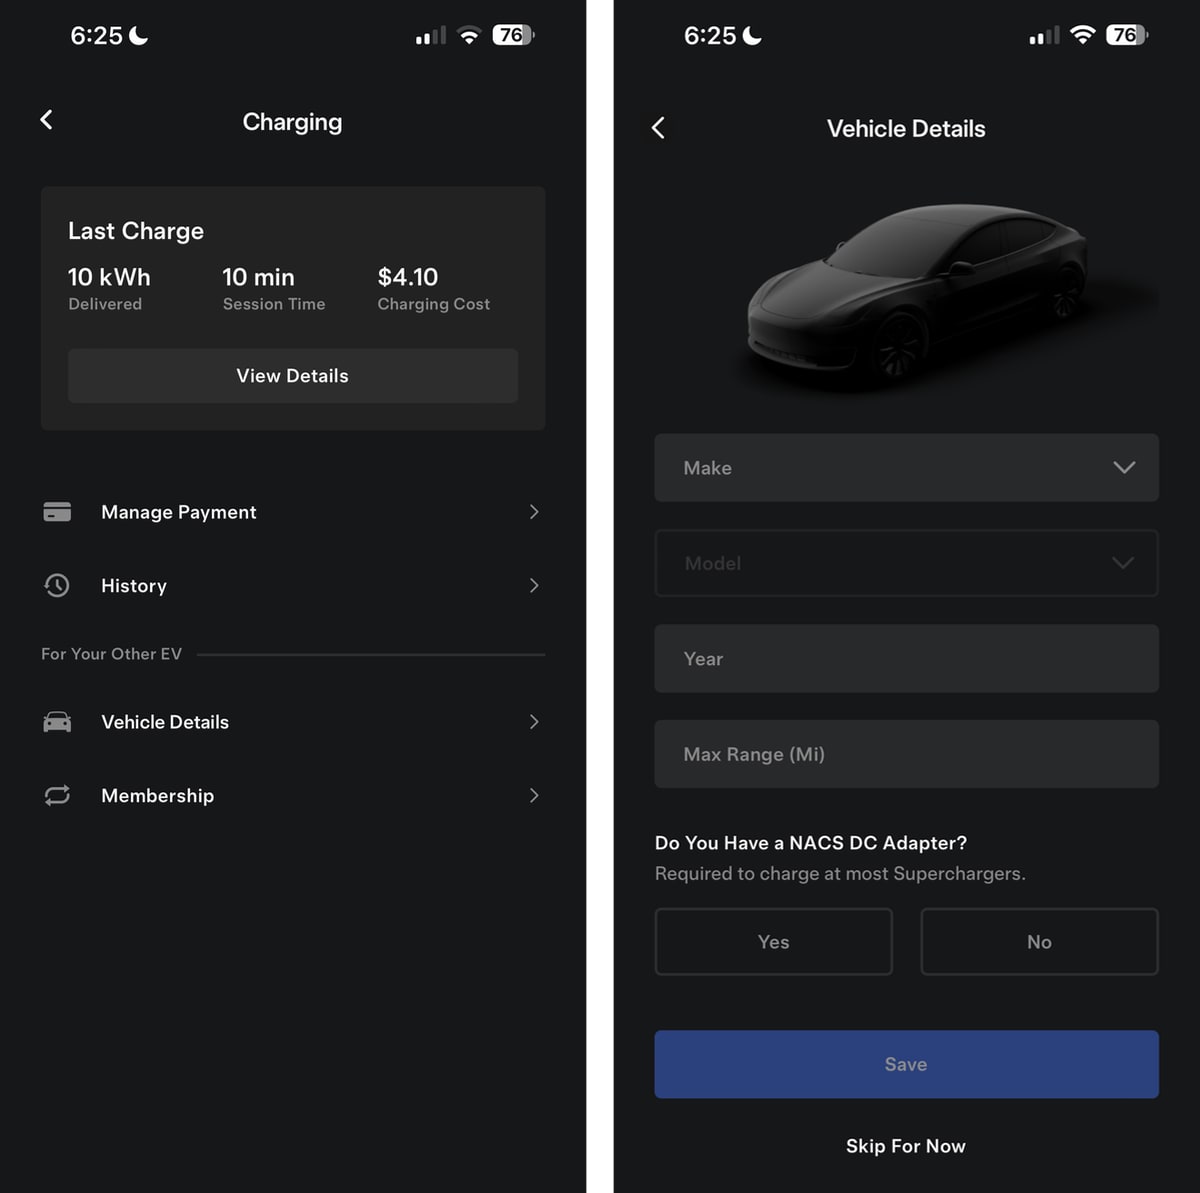 Tesla Other EV Details feature in update 4.30.6